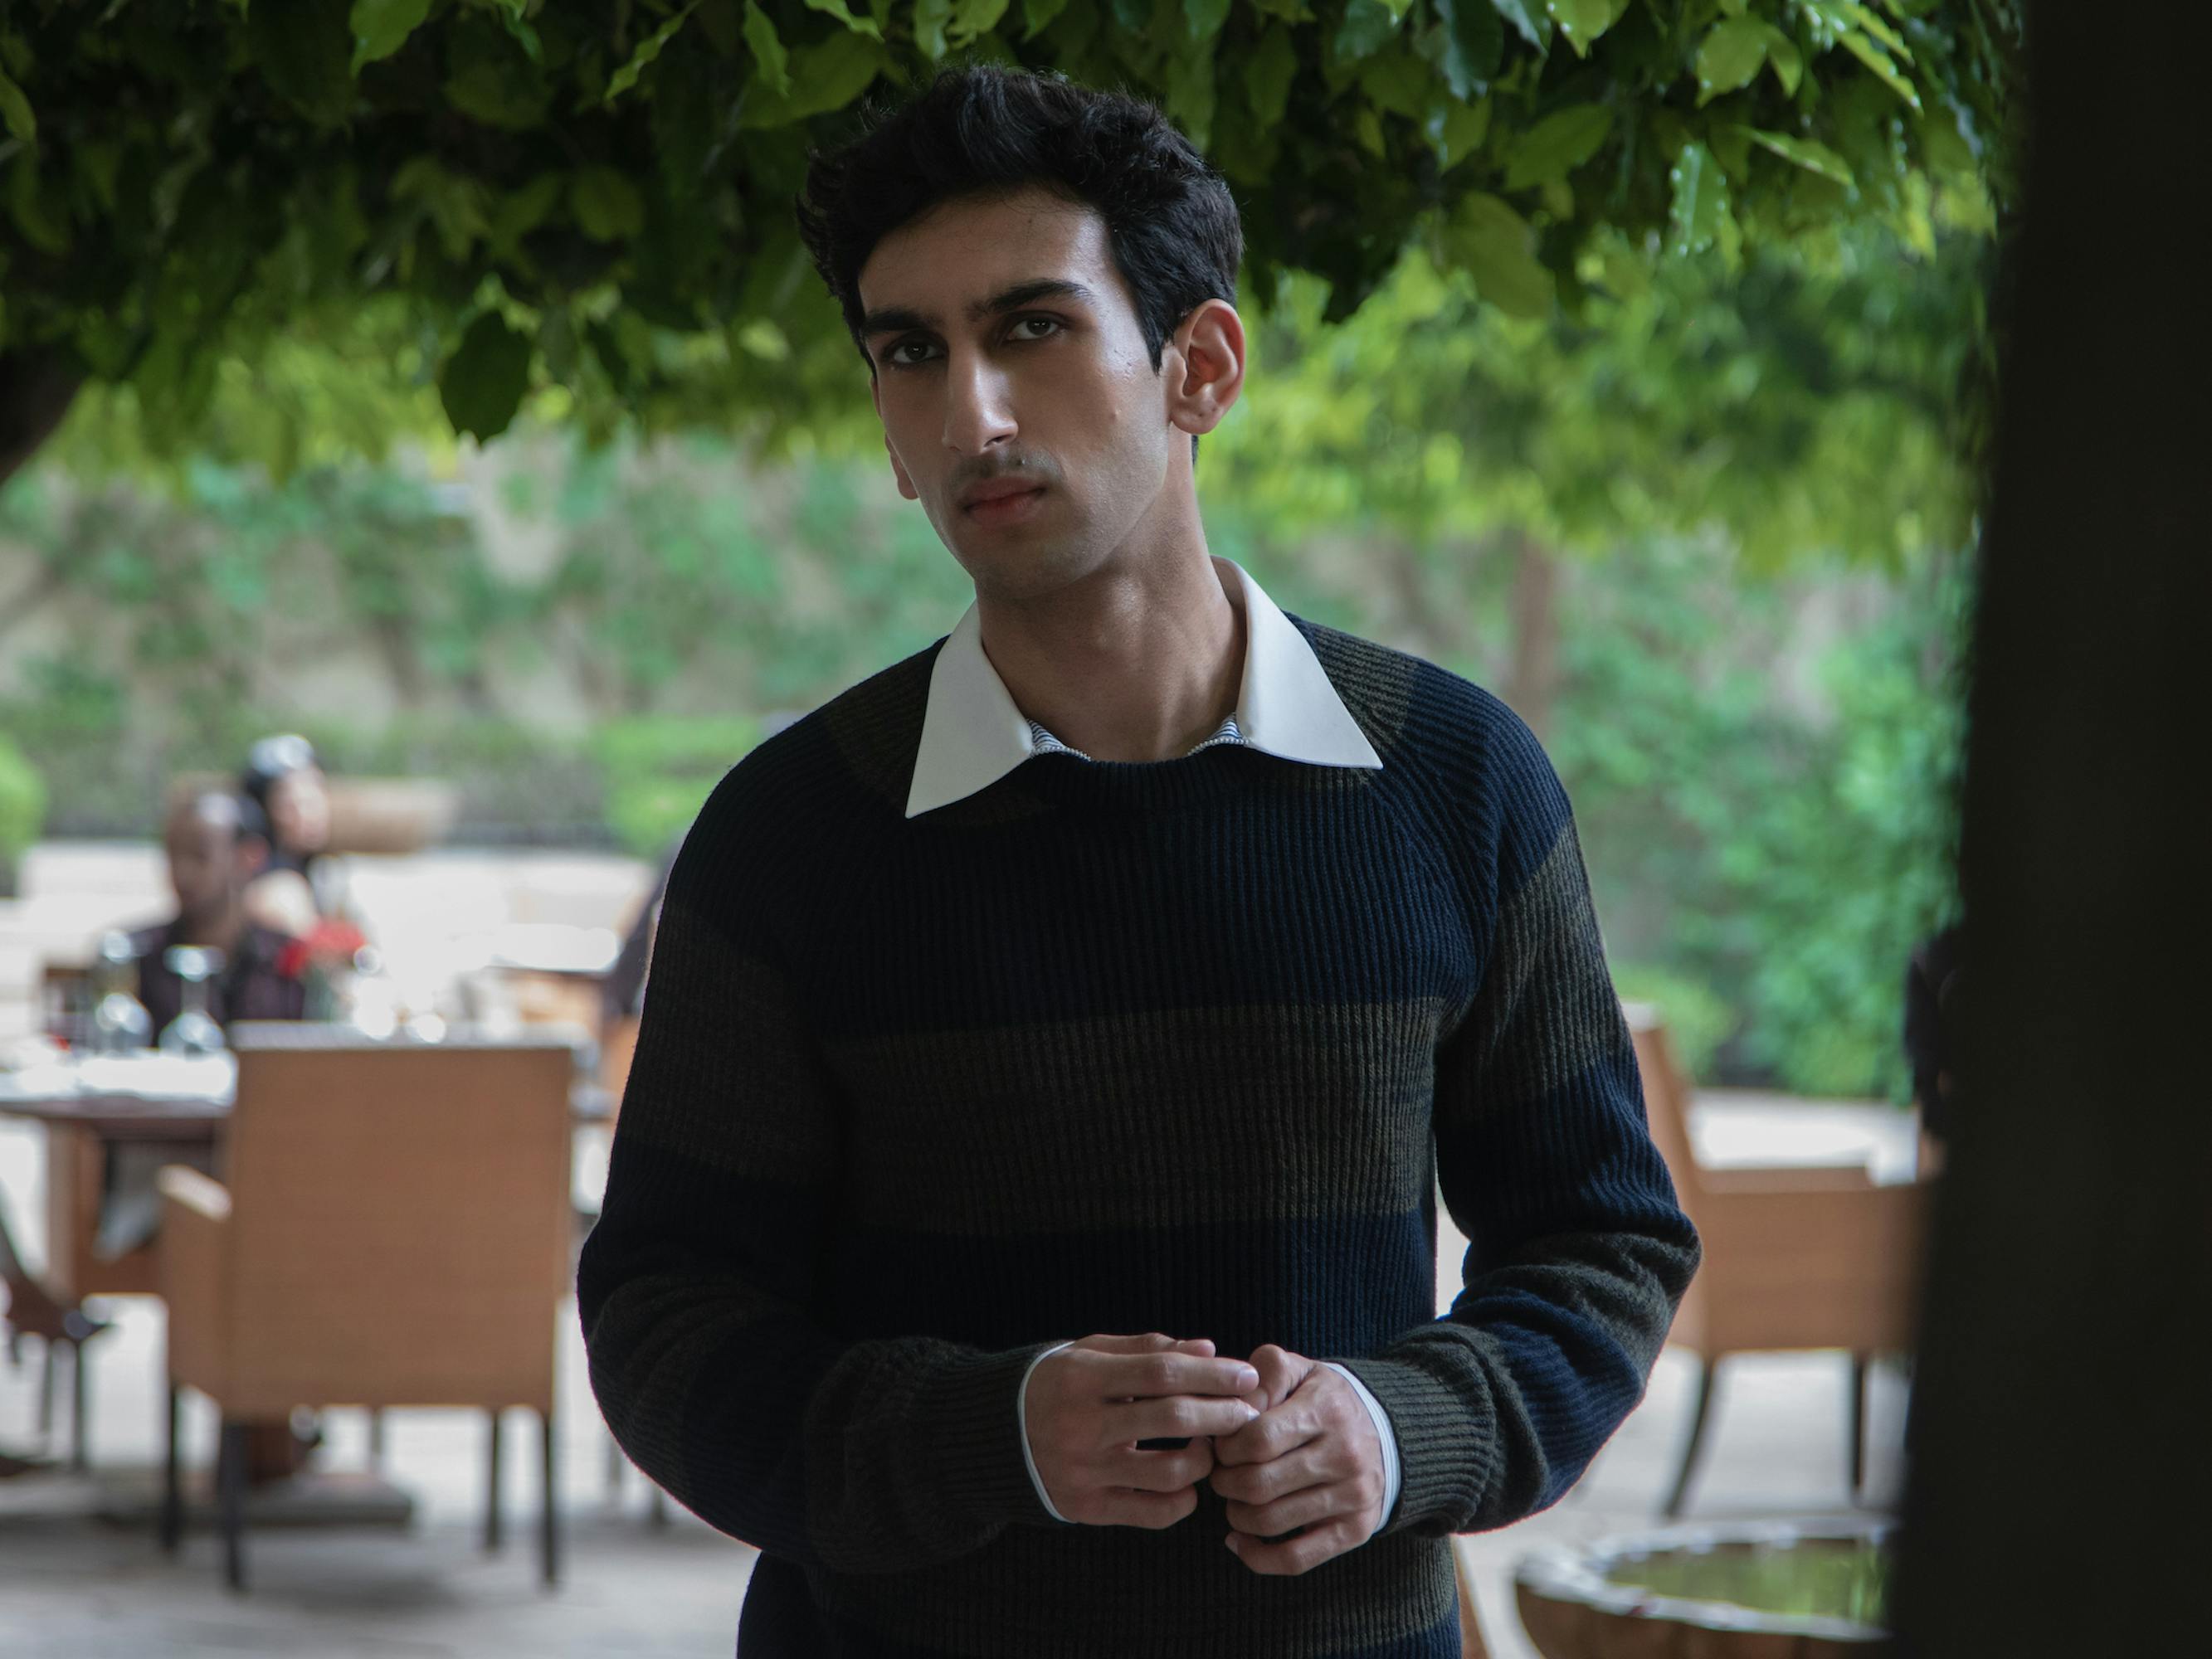 Sharan (Moses Koul) wears a navy and green striped sweater over a white collared shirt and looks dubious, standing in an outdoor area with brown tables and chairs. 